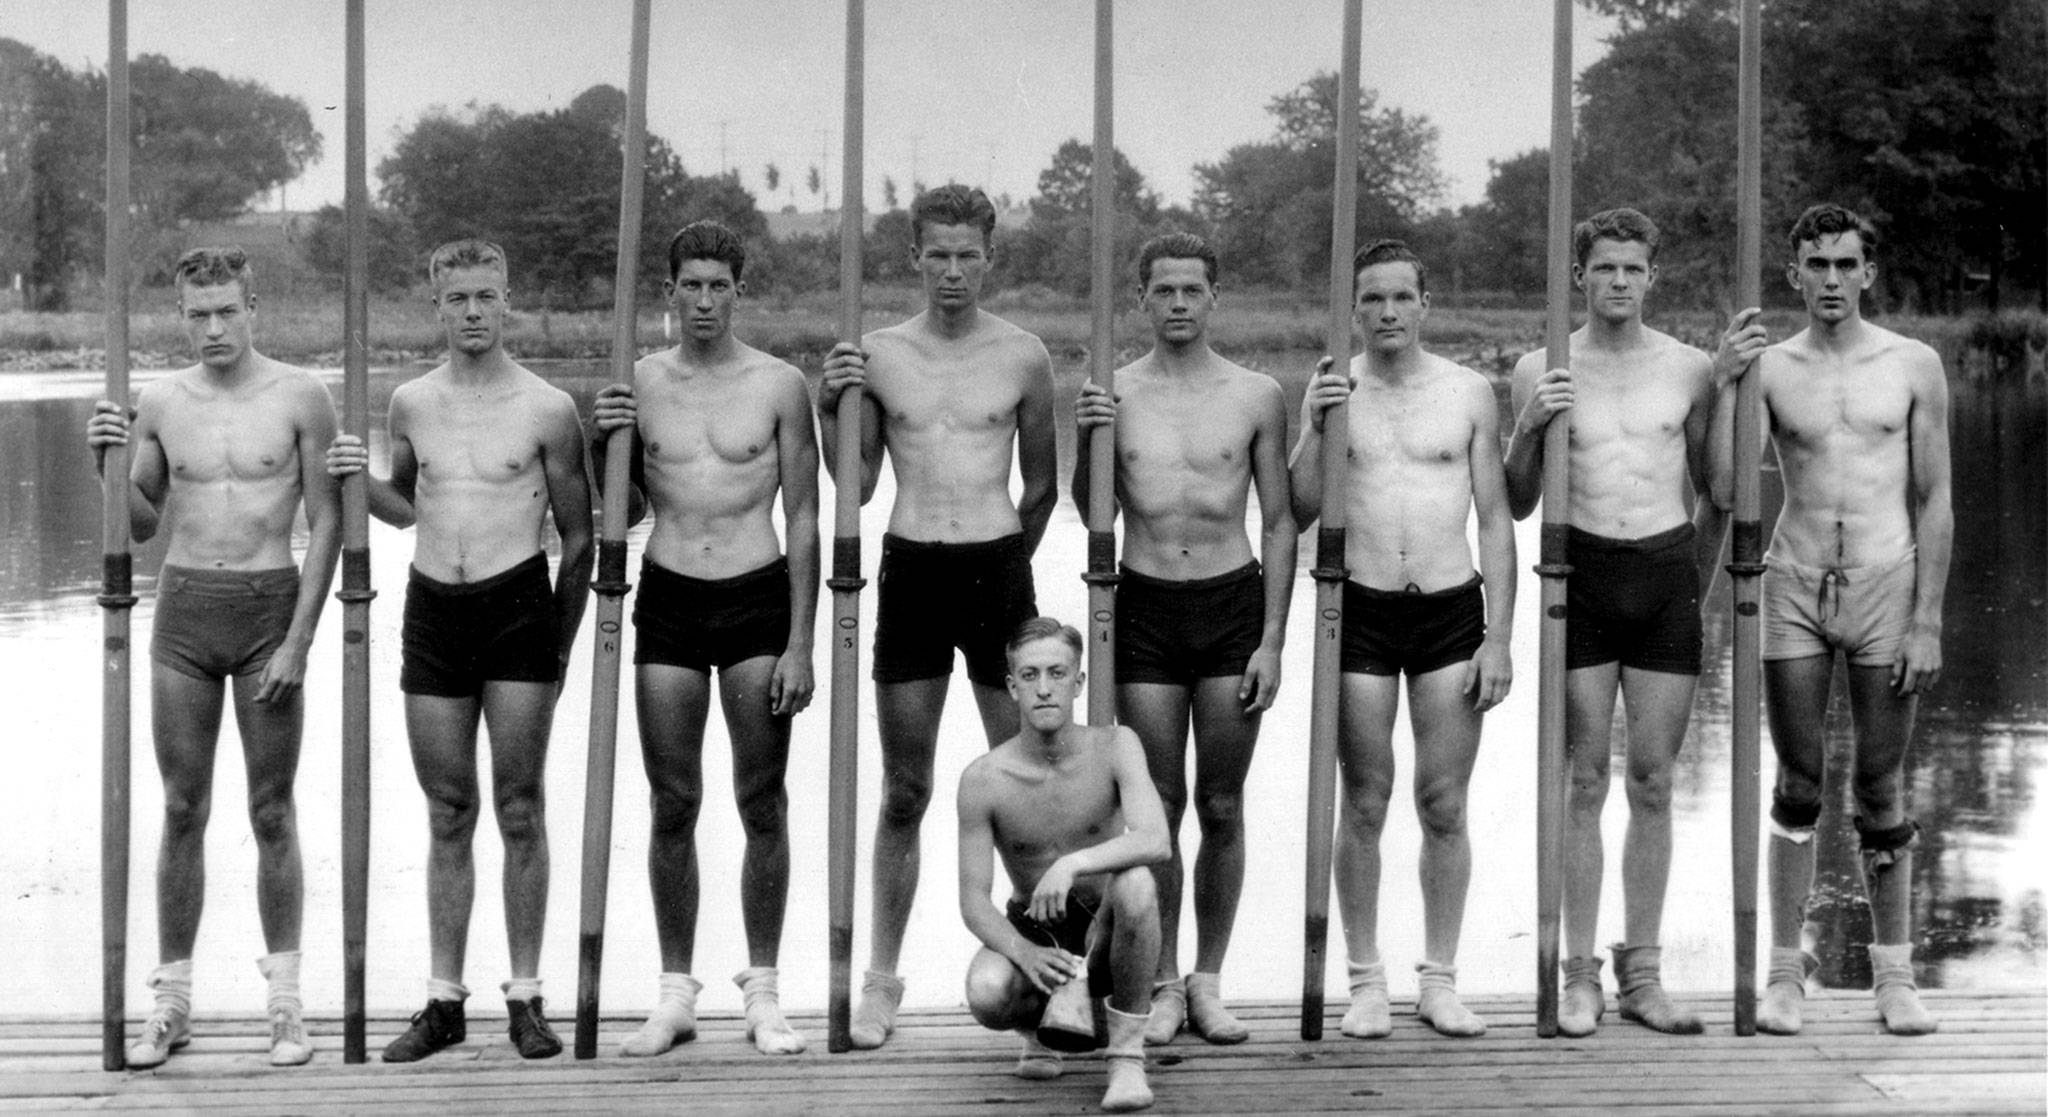 The 1936 University of Washington crew team who went on to win the goal medal at the Berlin Olympics. Joe Rantz is standing second from the left. (Jen Huffman)